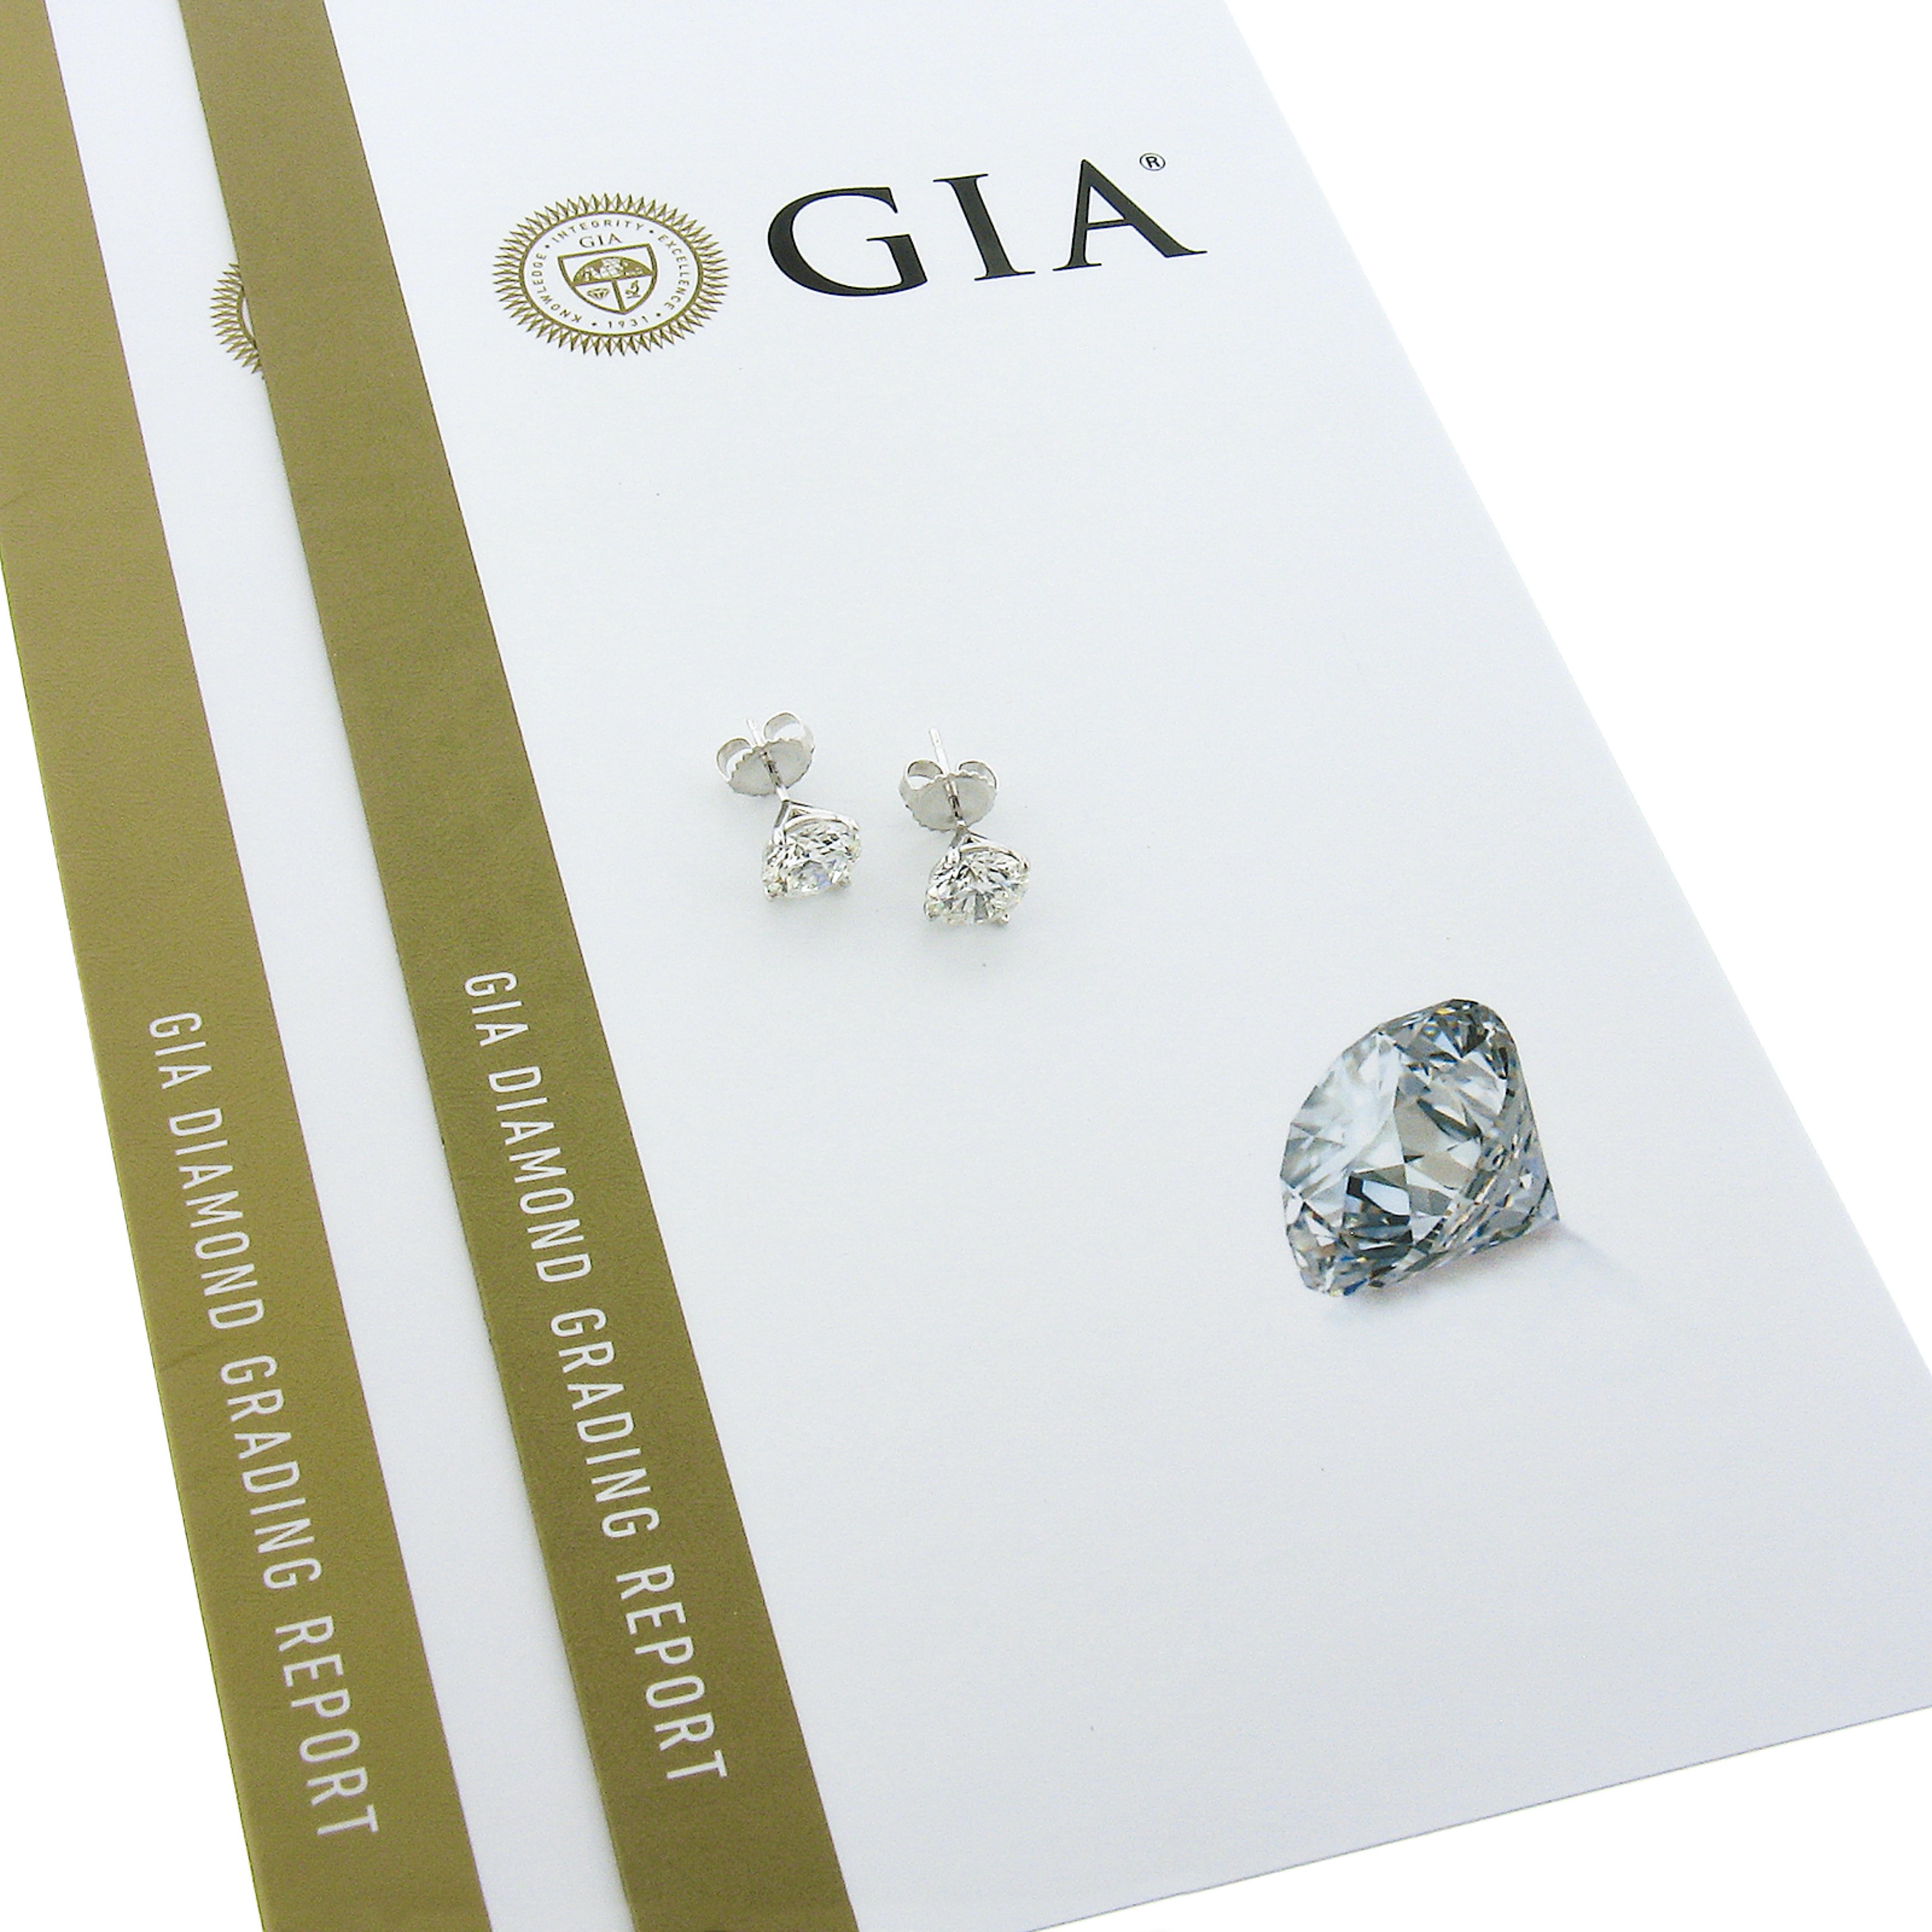 This stunning elegant pair of diamond stud earrings was newly crafted from solid platinum and features two brilliant and fiery, GIA certified, round martini prong set diamonds. These very fine quality diamonds total exactly 3.06 carats in weight.